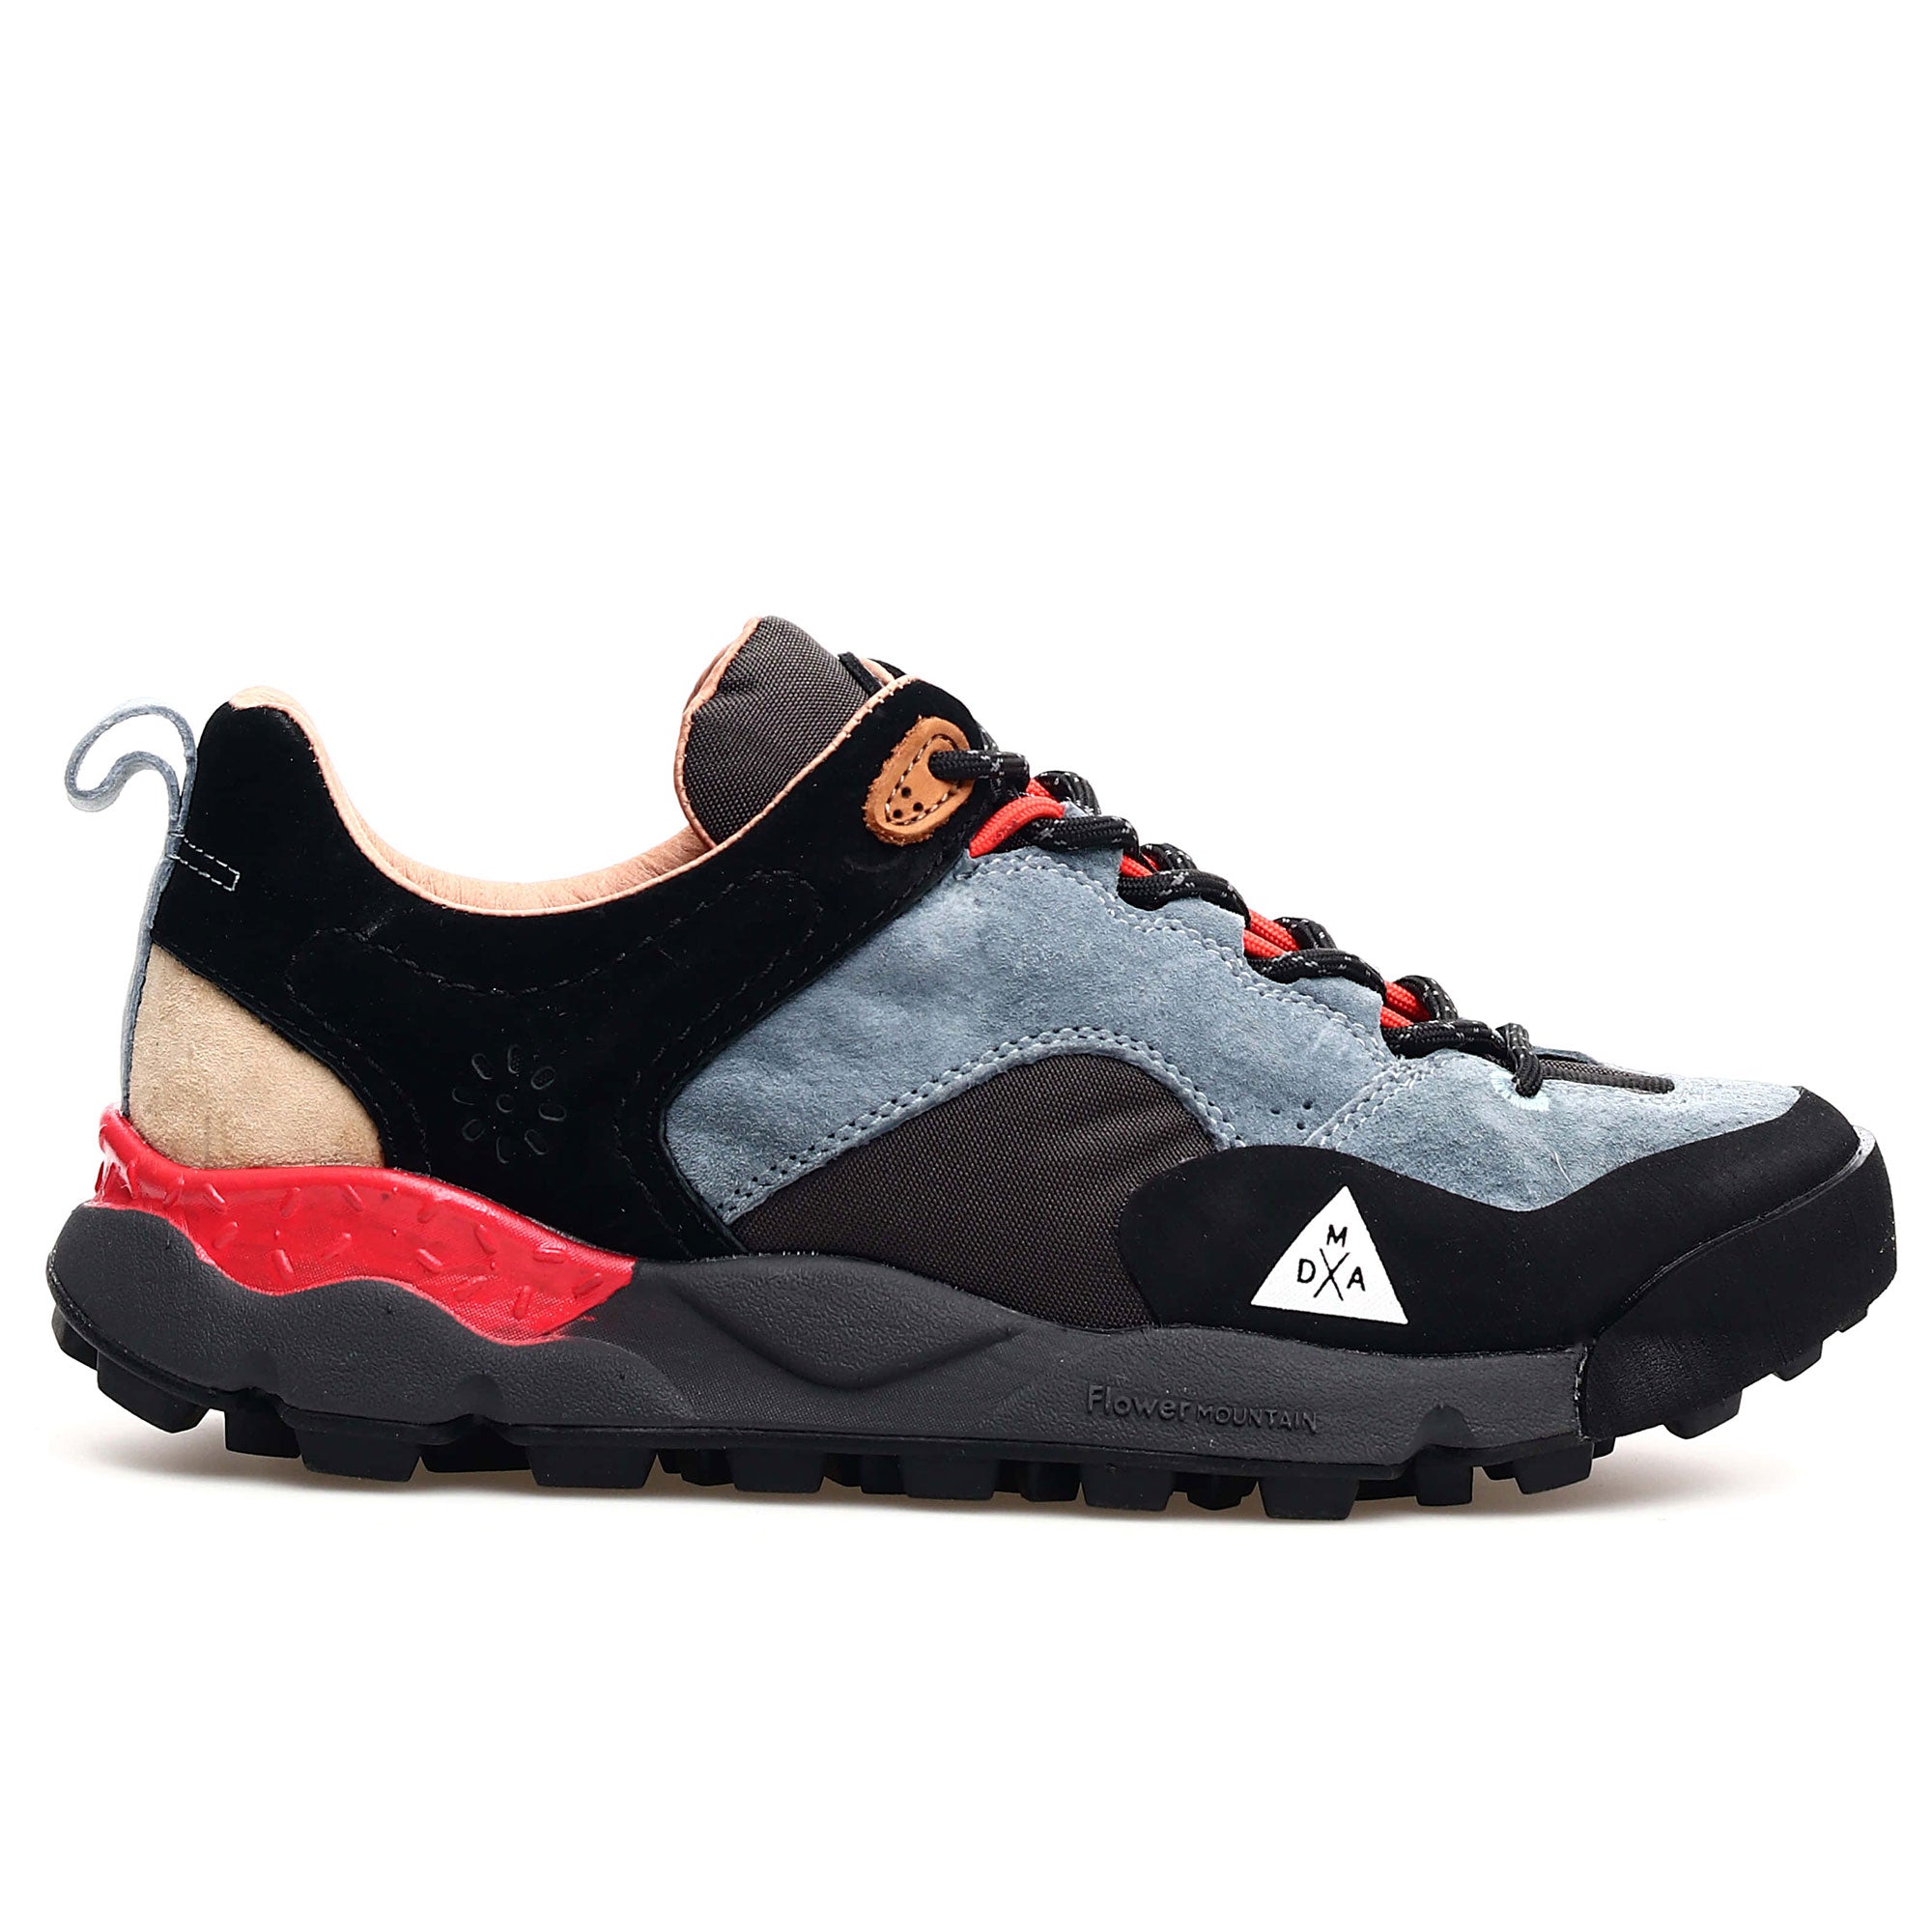 Flower Mountain Back Country Low Waterproof Trainers - Navy / Black